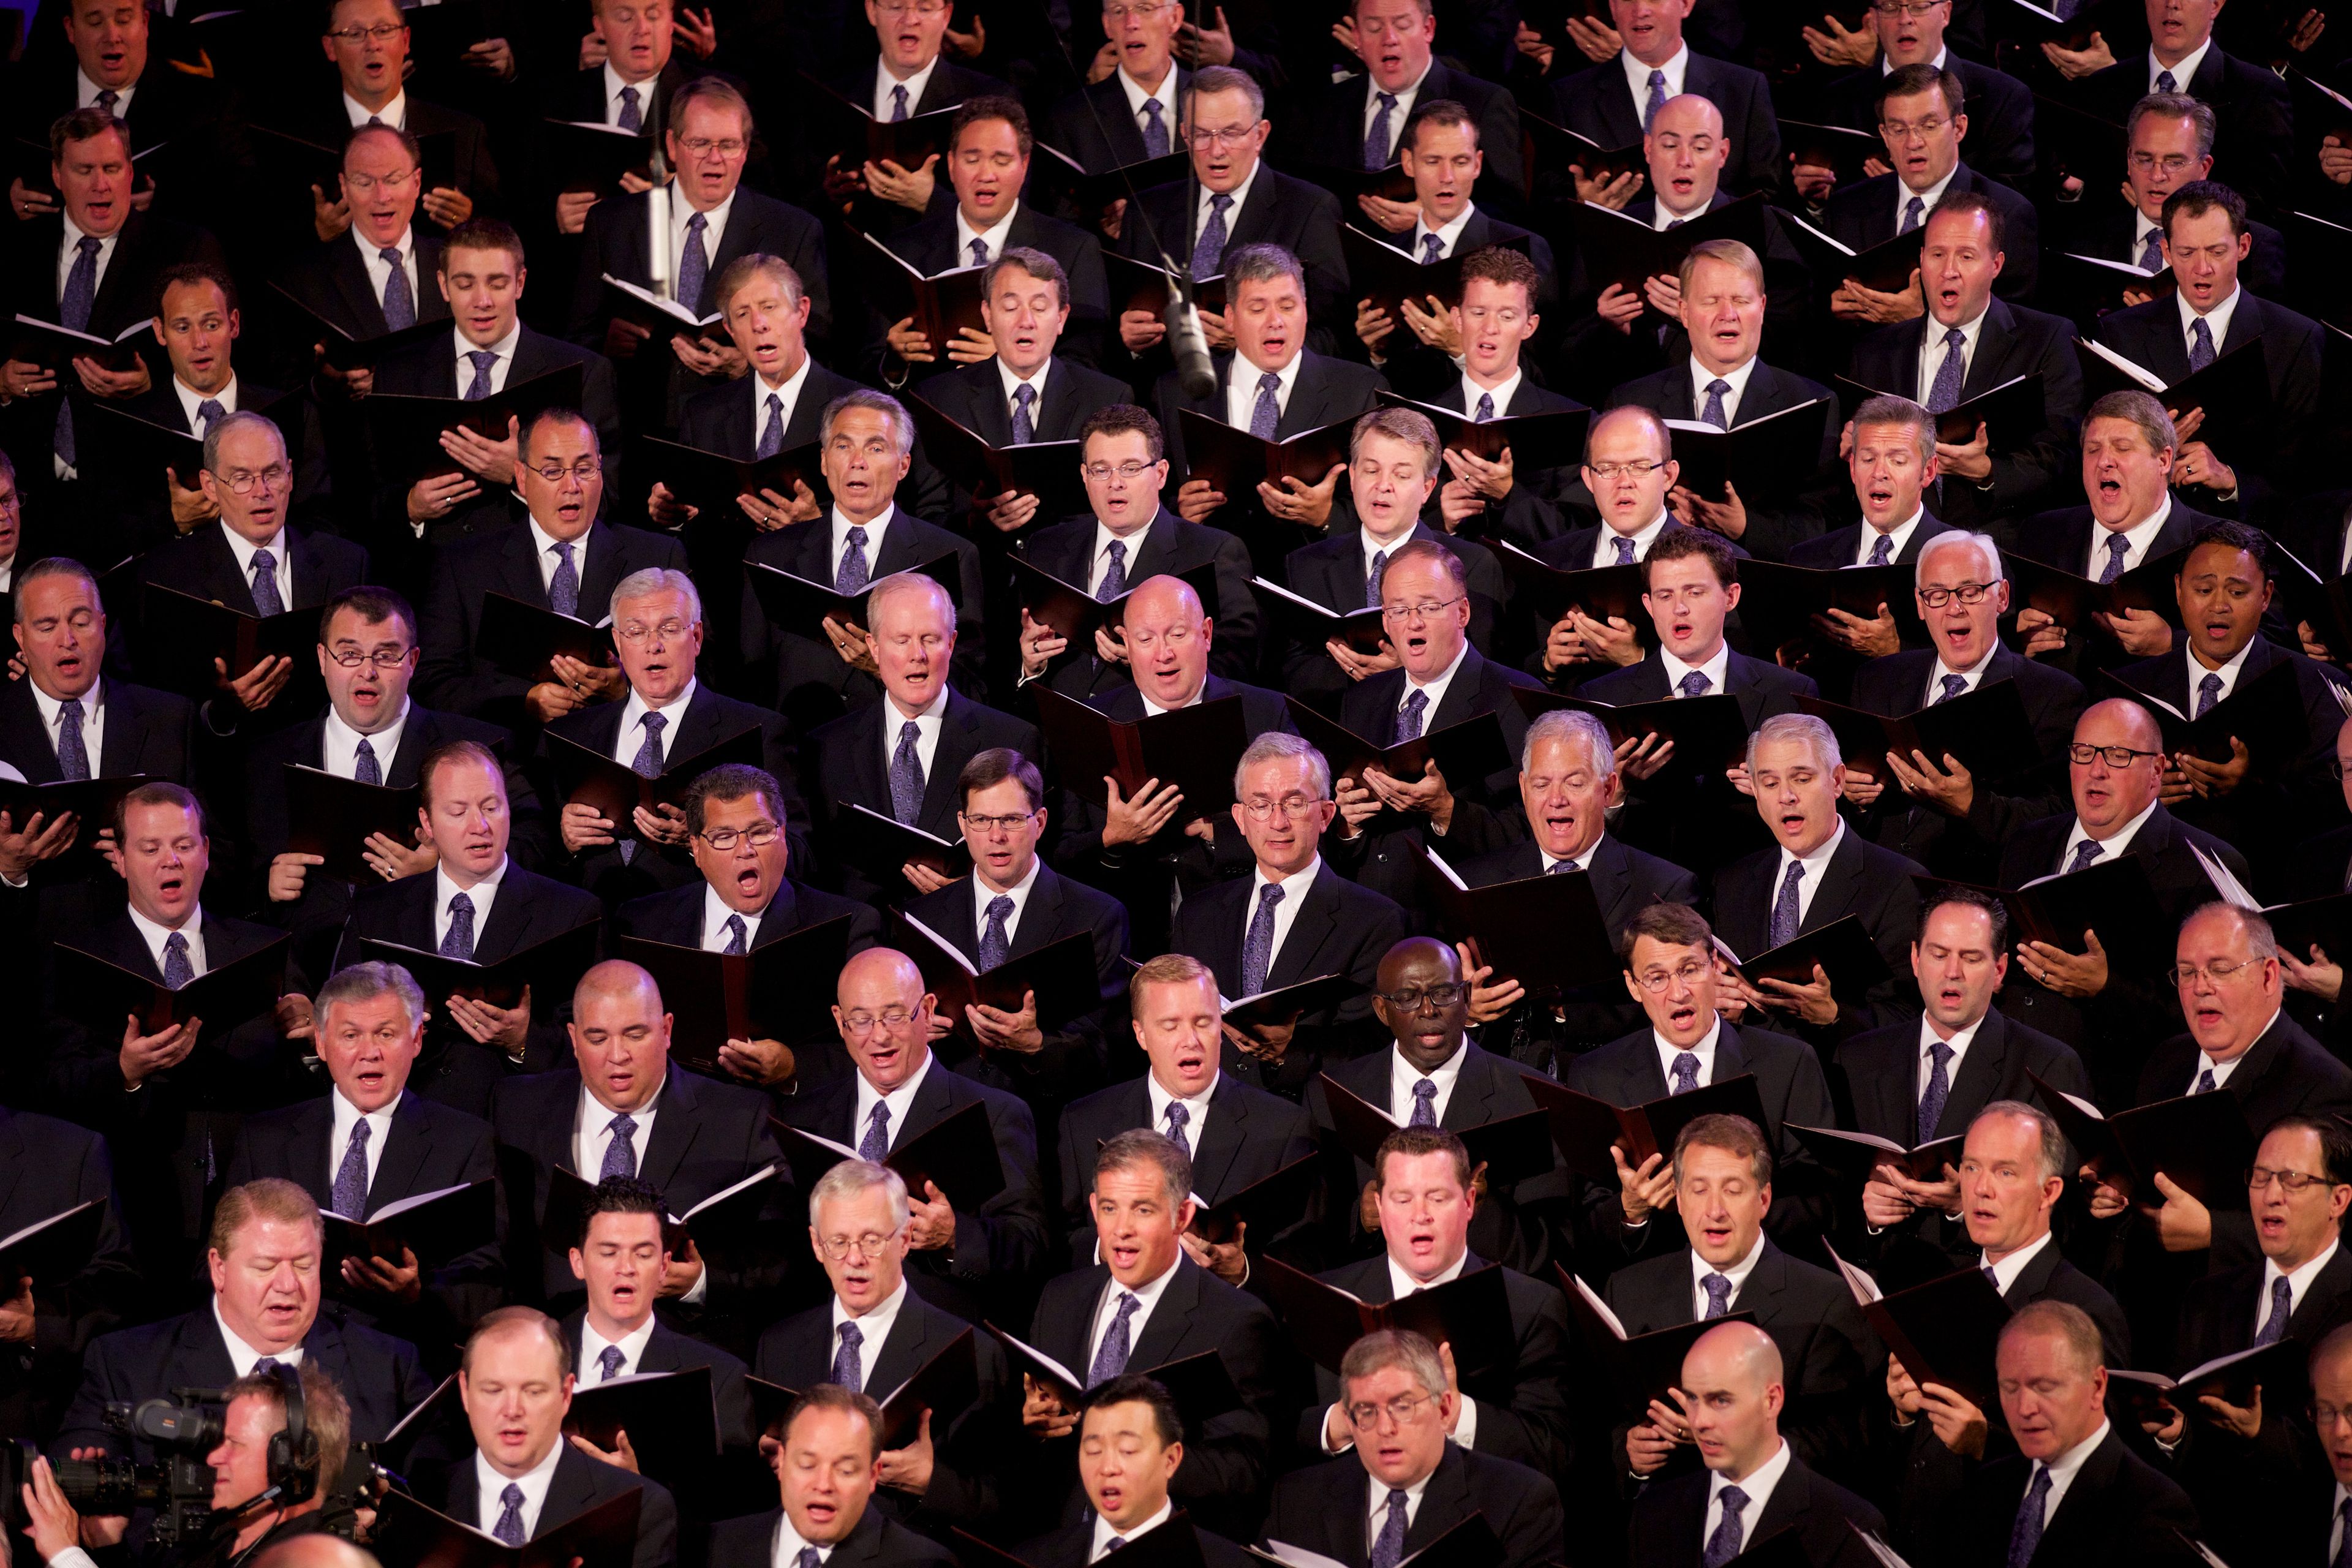 A section of the men of the Mormon Tabernacle Choir singing at the funeral of President Boyd K. Packer in July 2015.